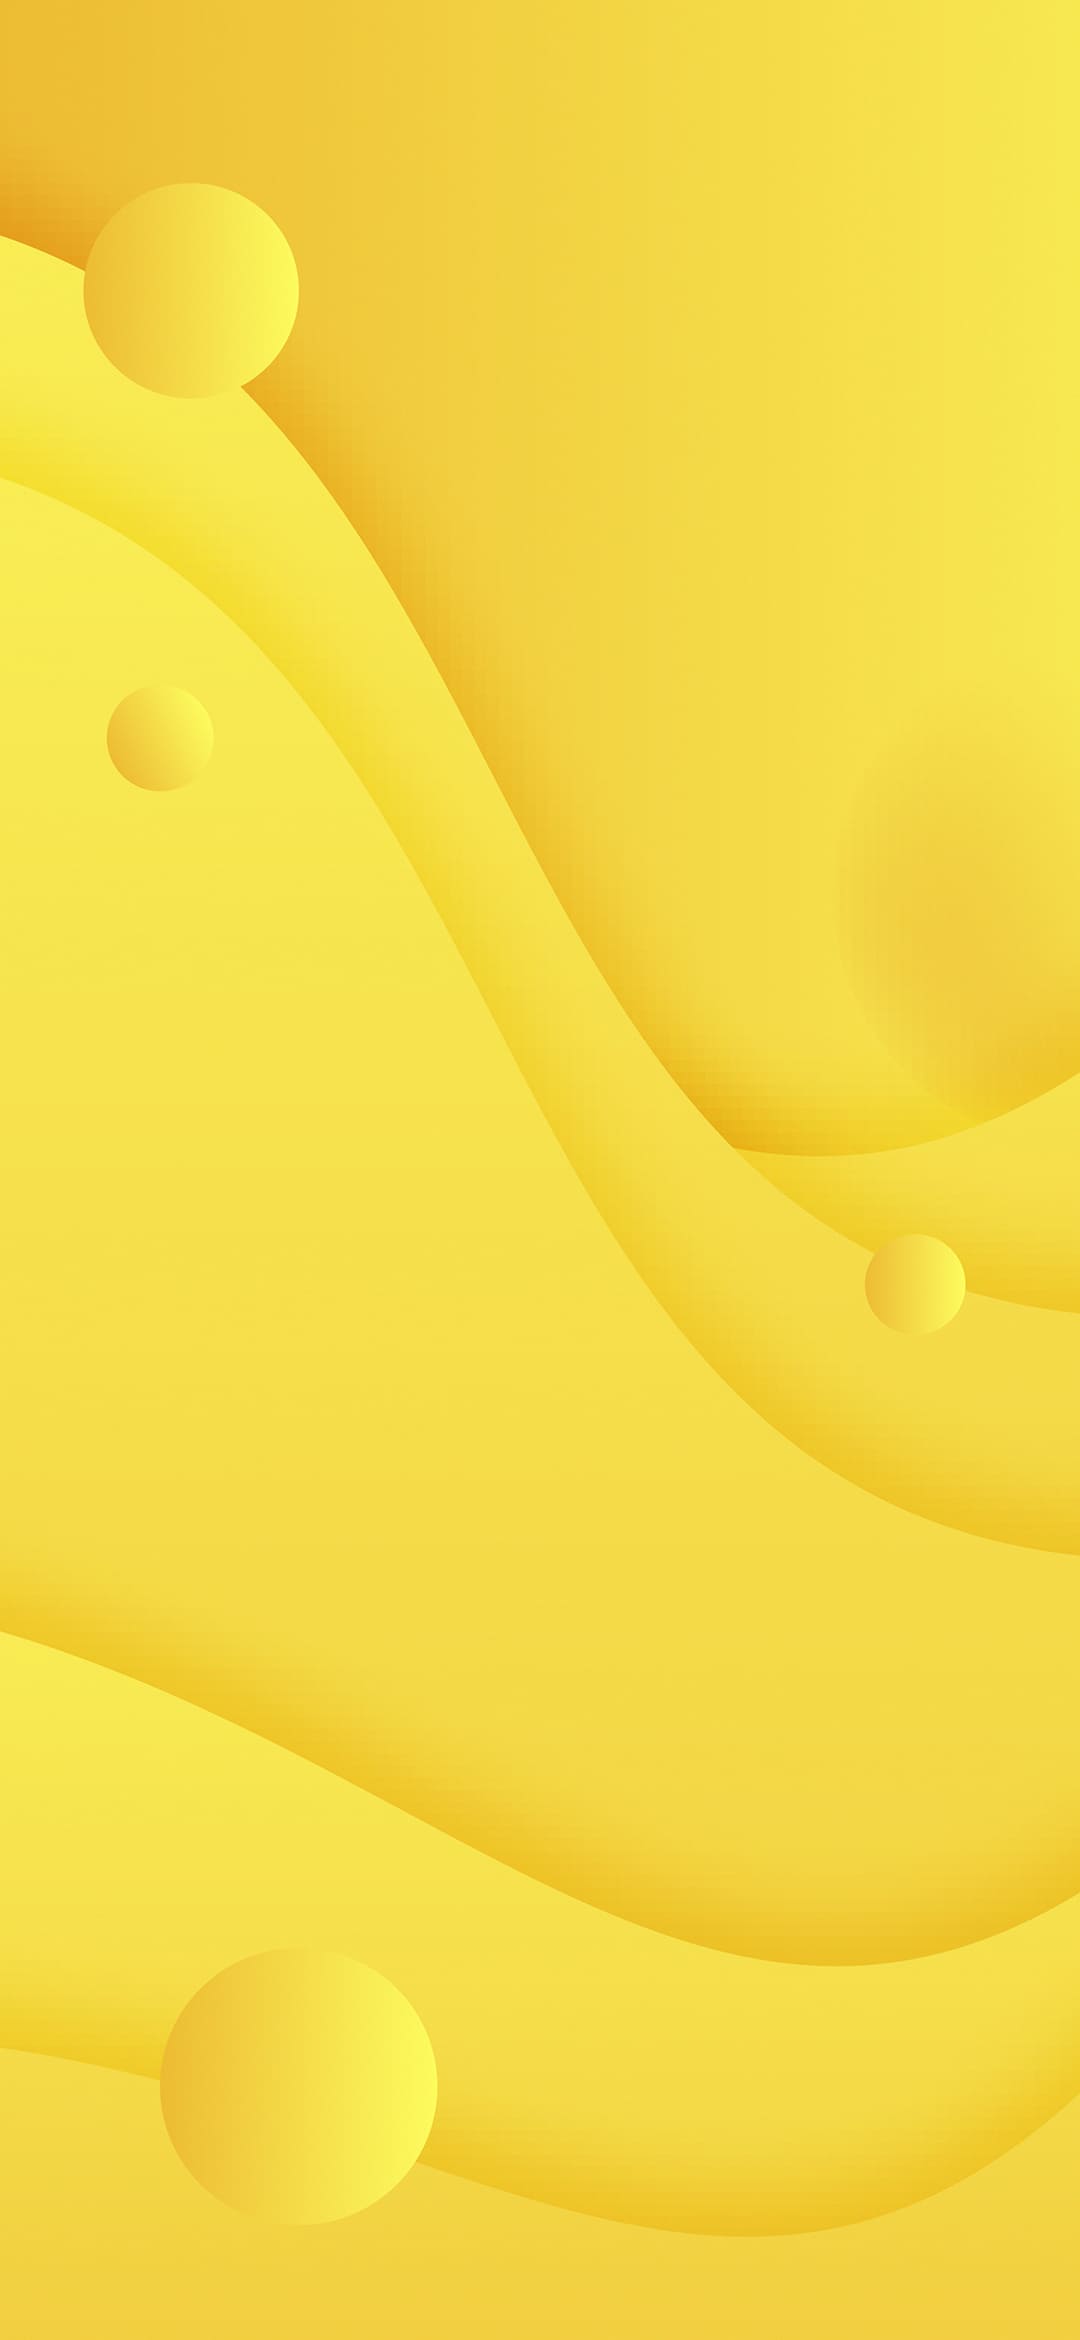 40 Yellow Aesthetic Wallpaper Options For iPhone  Iphone wallpaper yellow  Yellow quotes Trendy wallpaper